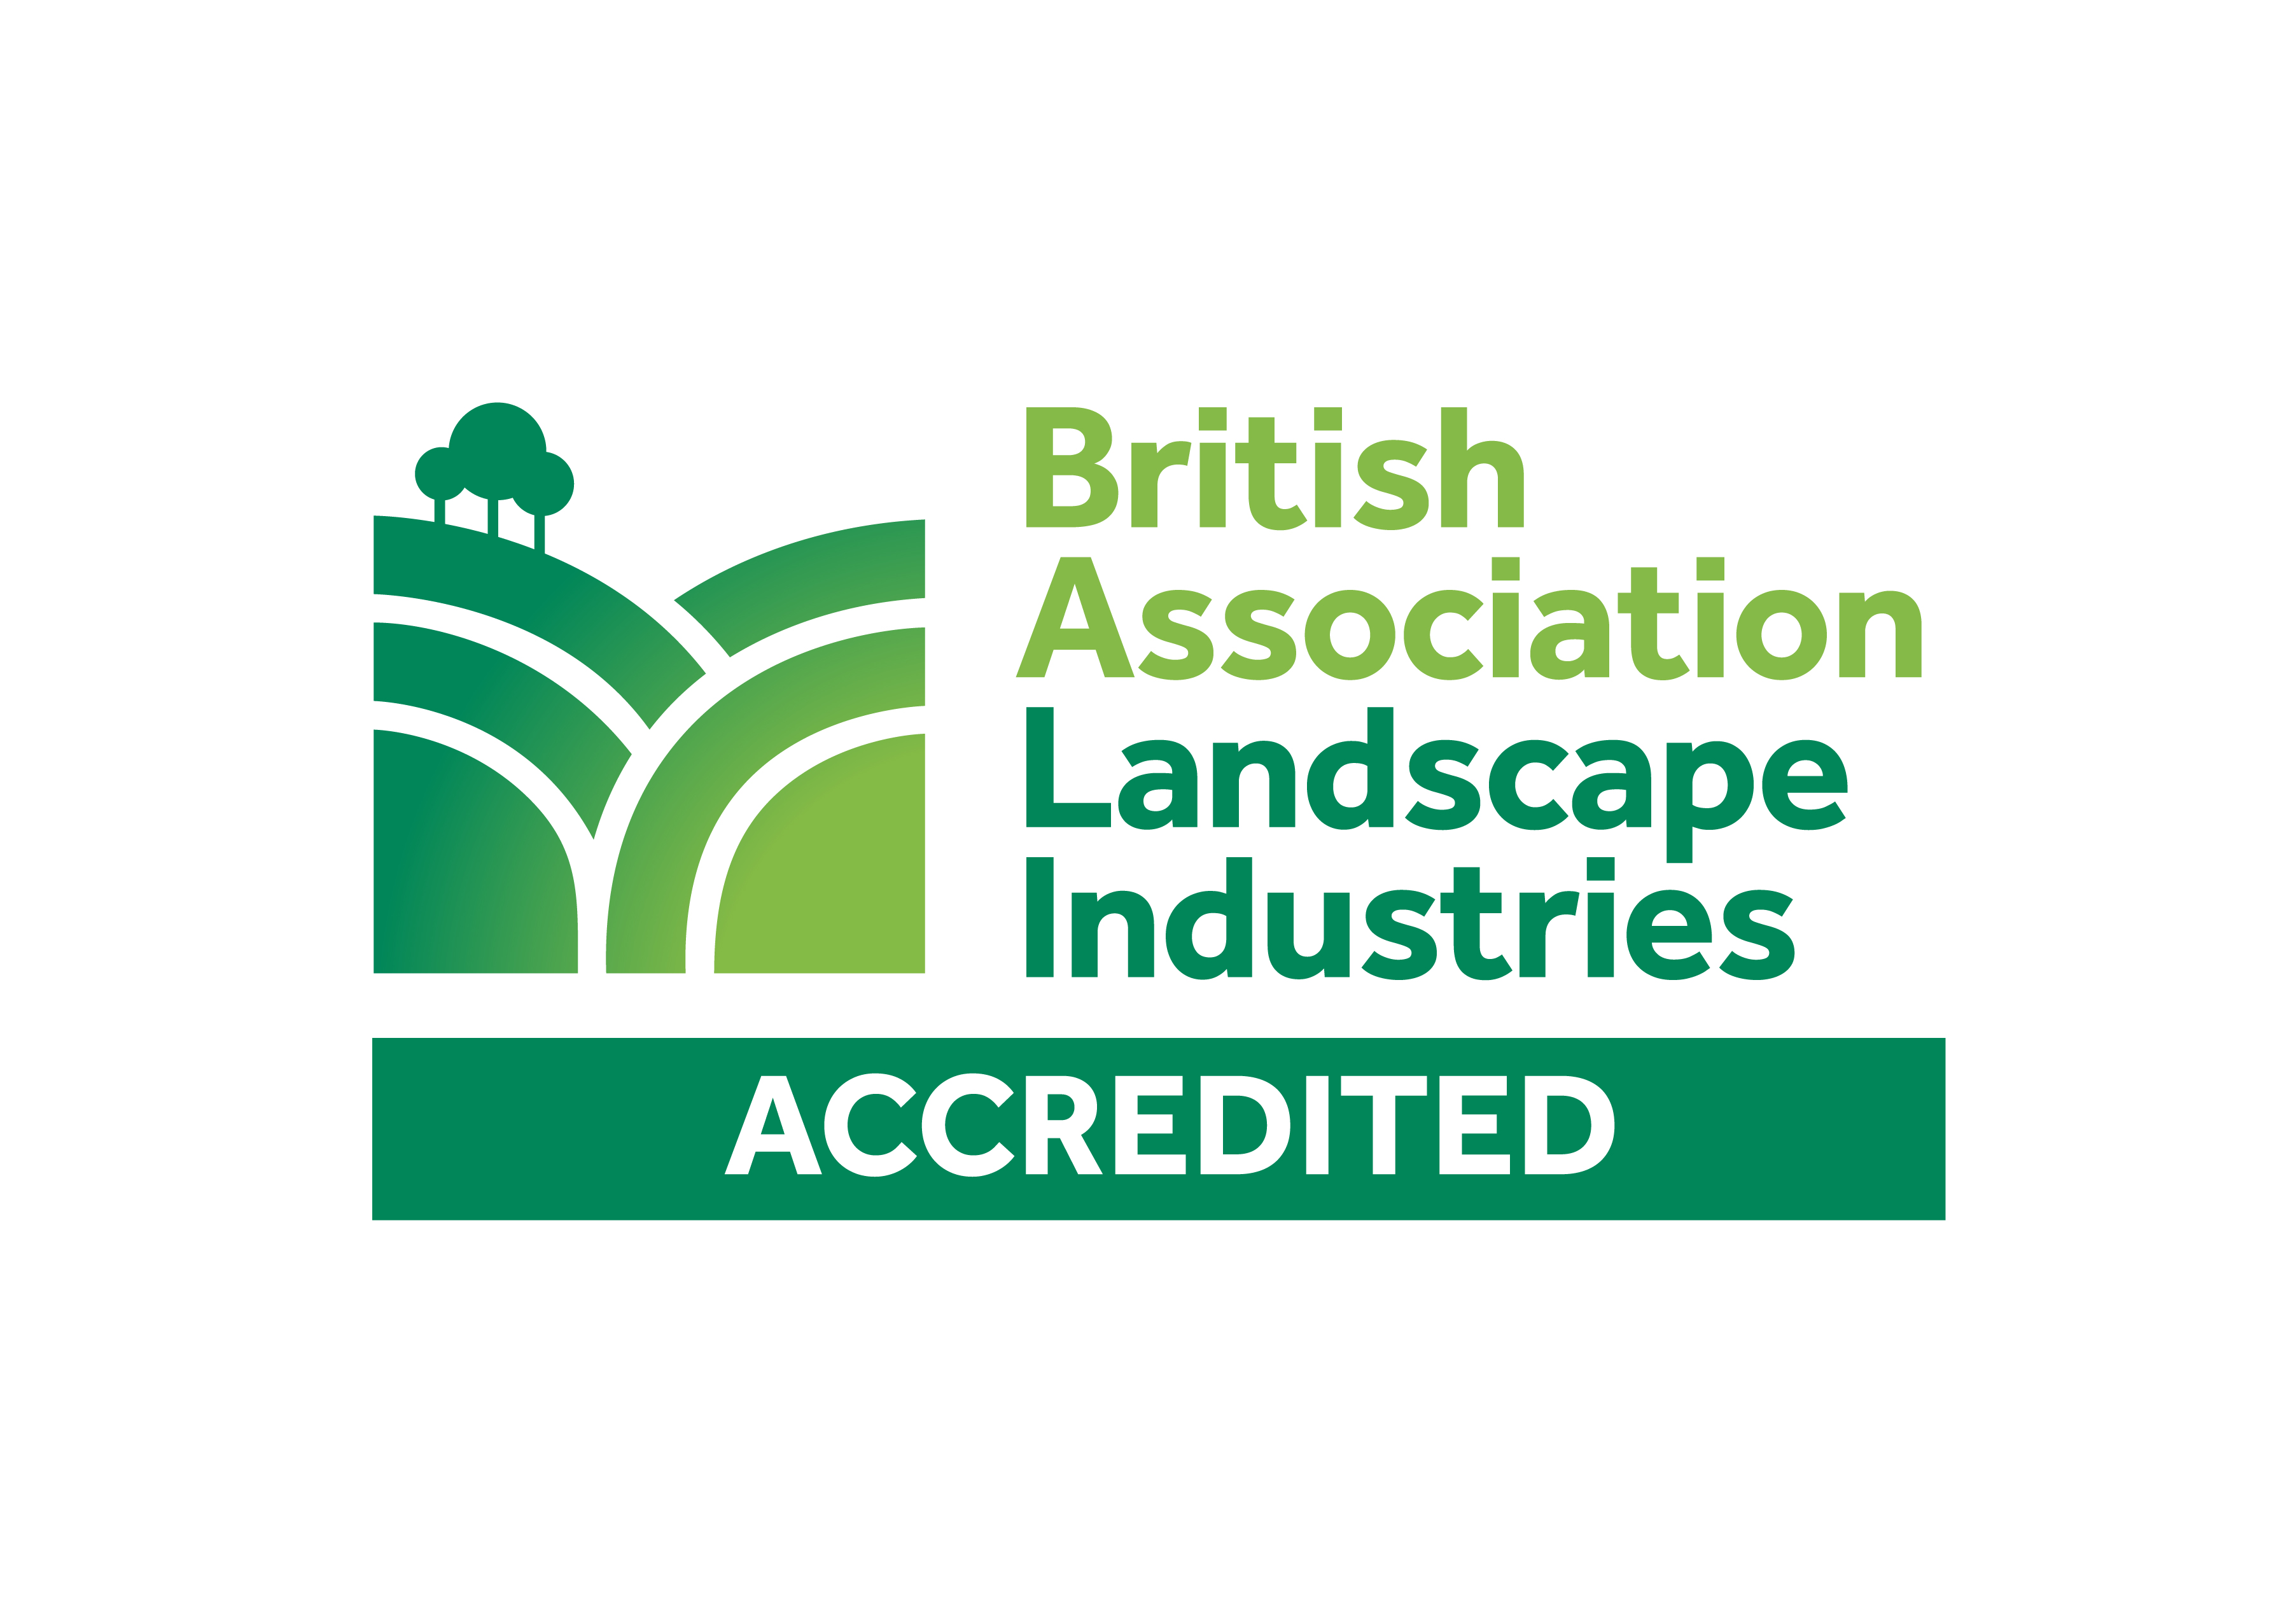 An image of the logo for the British Association of Landscape Industries (BALI)